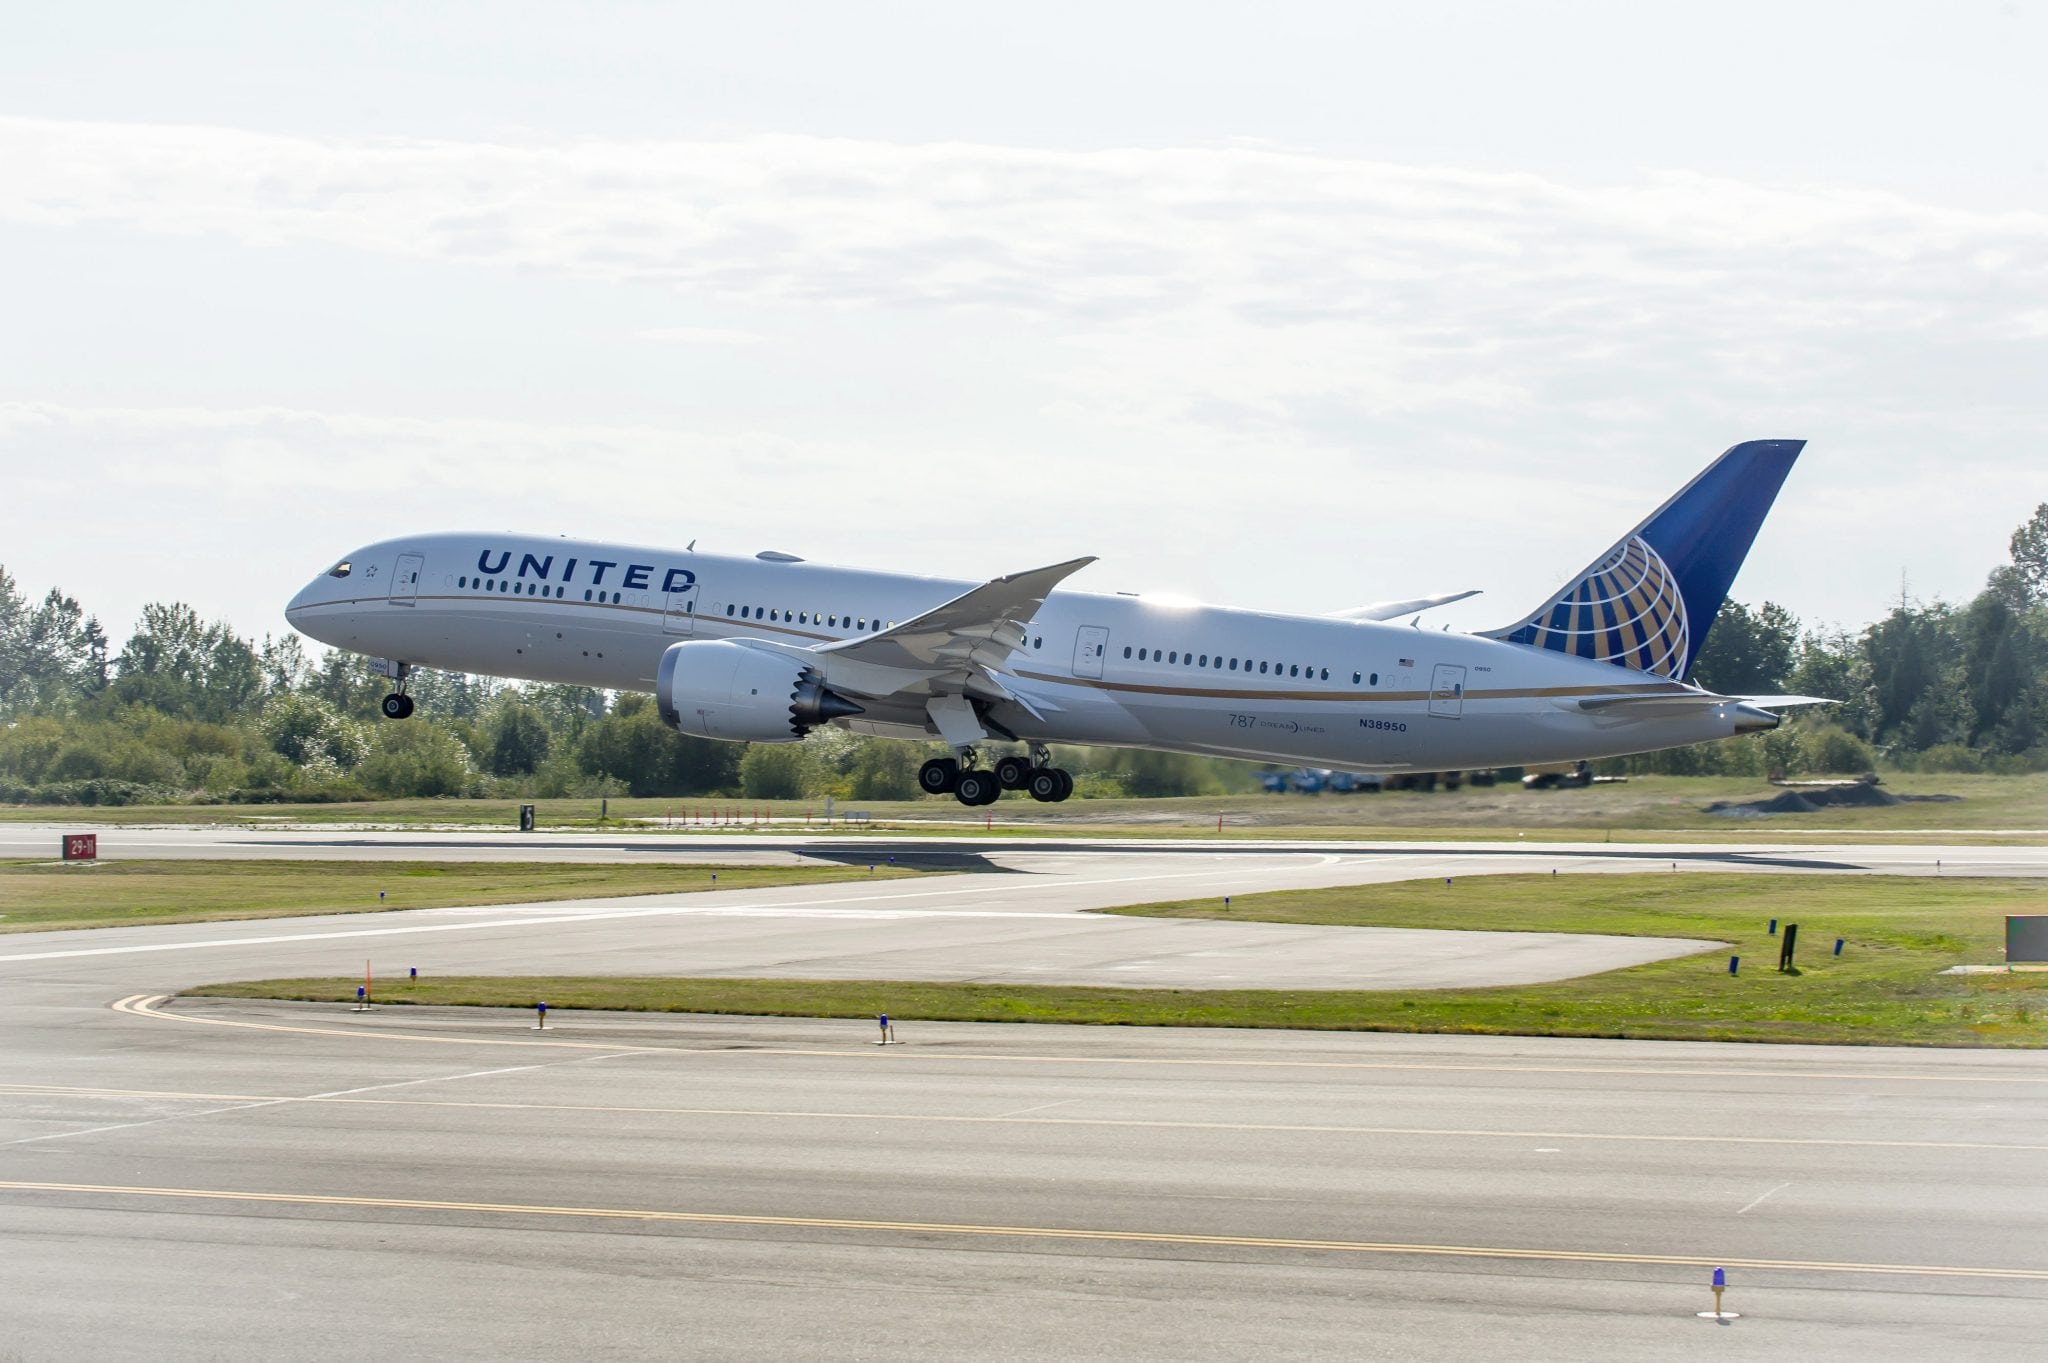 A United Airlines Boeing 787-9 Dreamliner